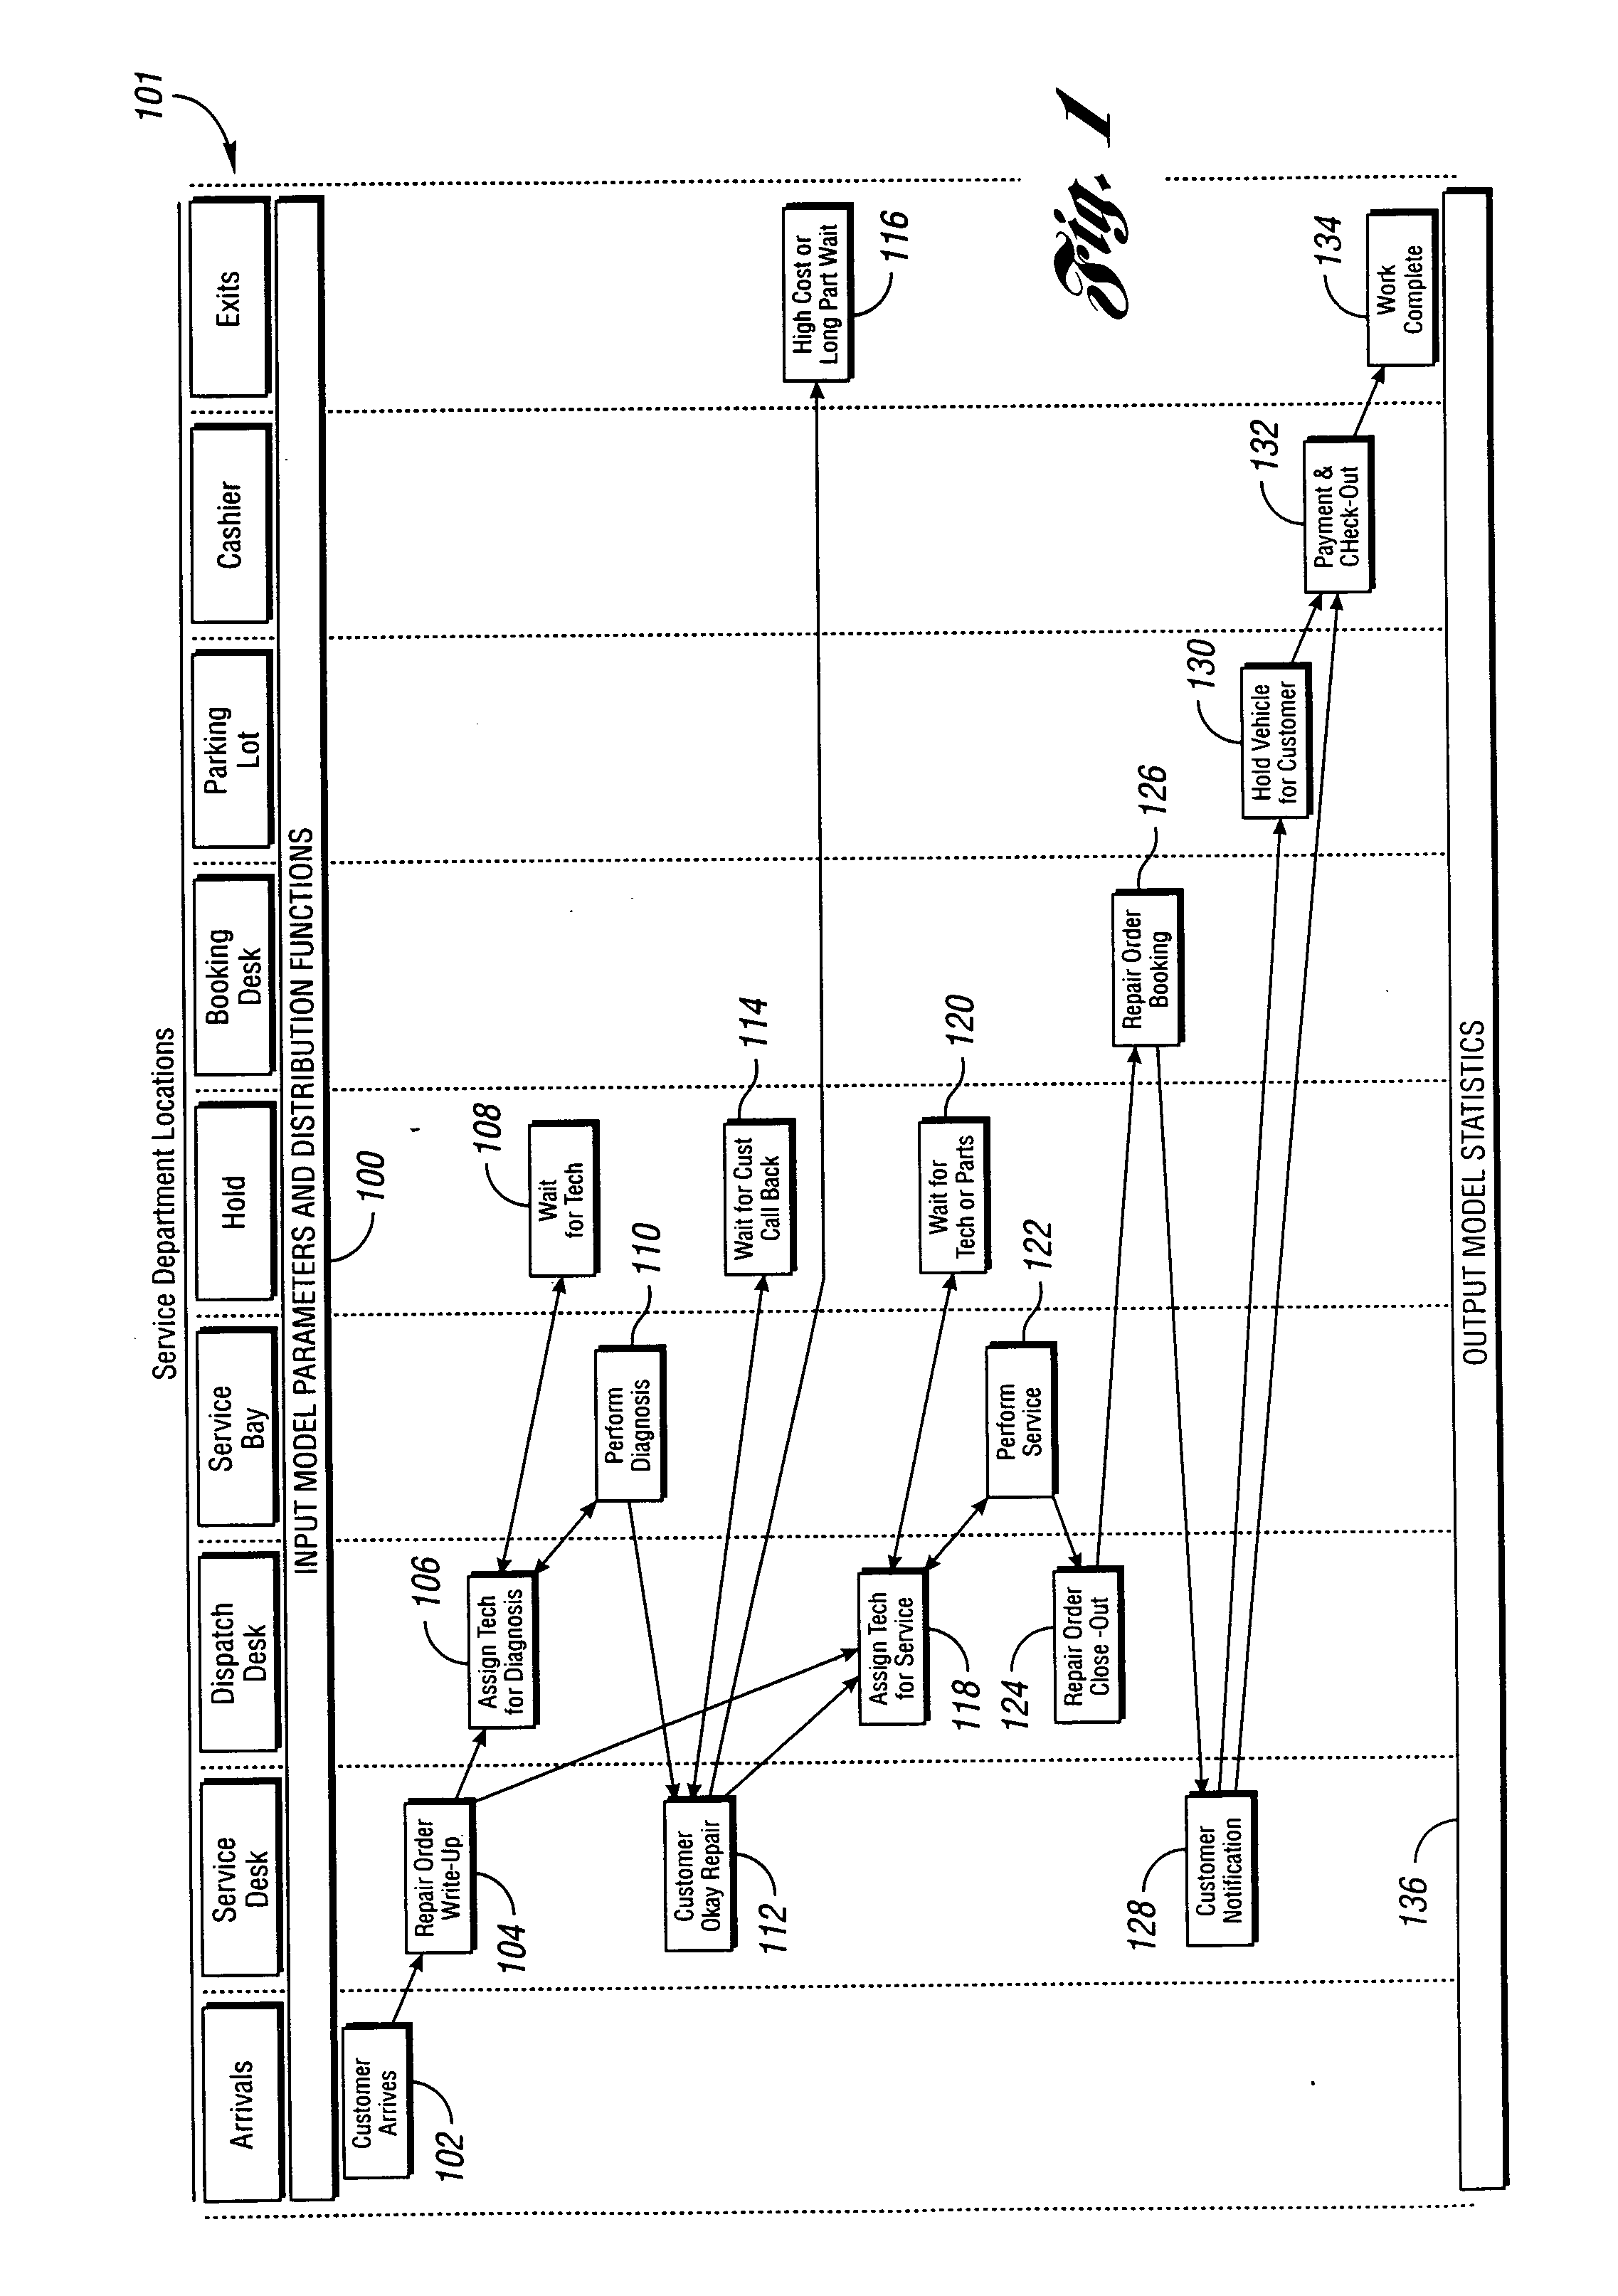 Method and system for modeling and simulating an automobile service facility